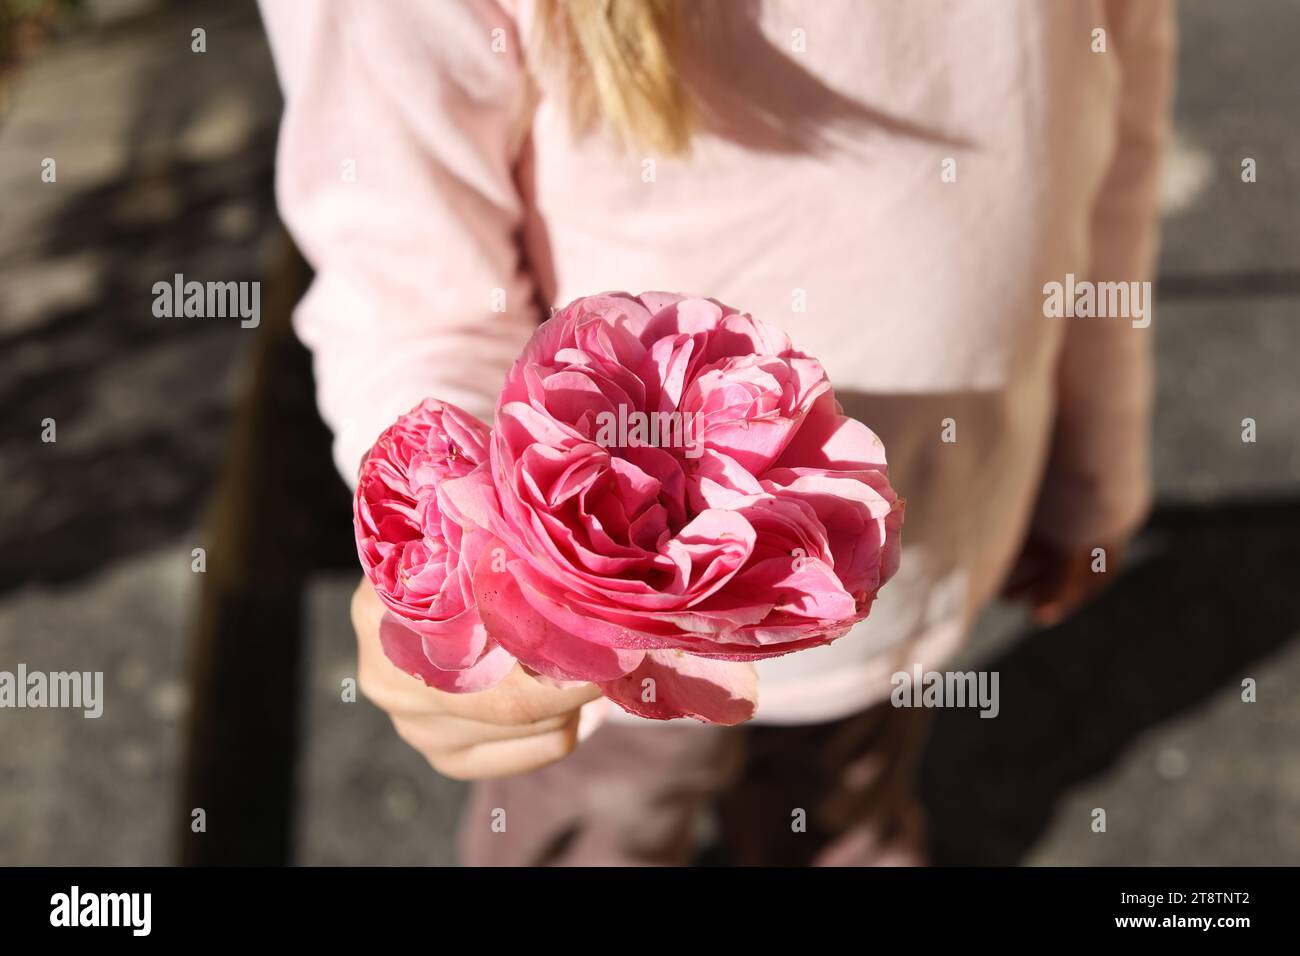 a close up of a little girls hand holding Rosa  centifolia, the Provence rose, cabbage rose or Rose de Mai flower Stock Photo